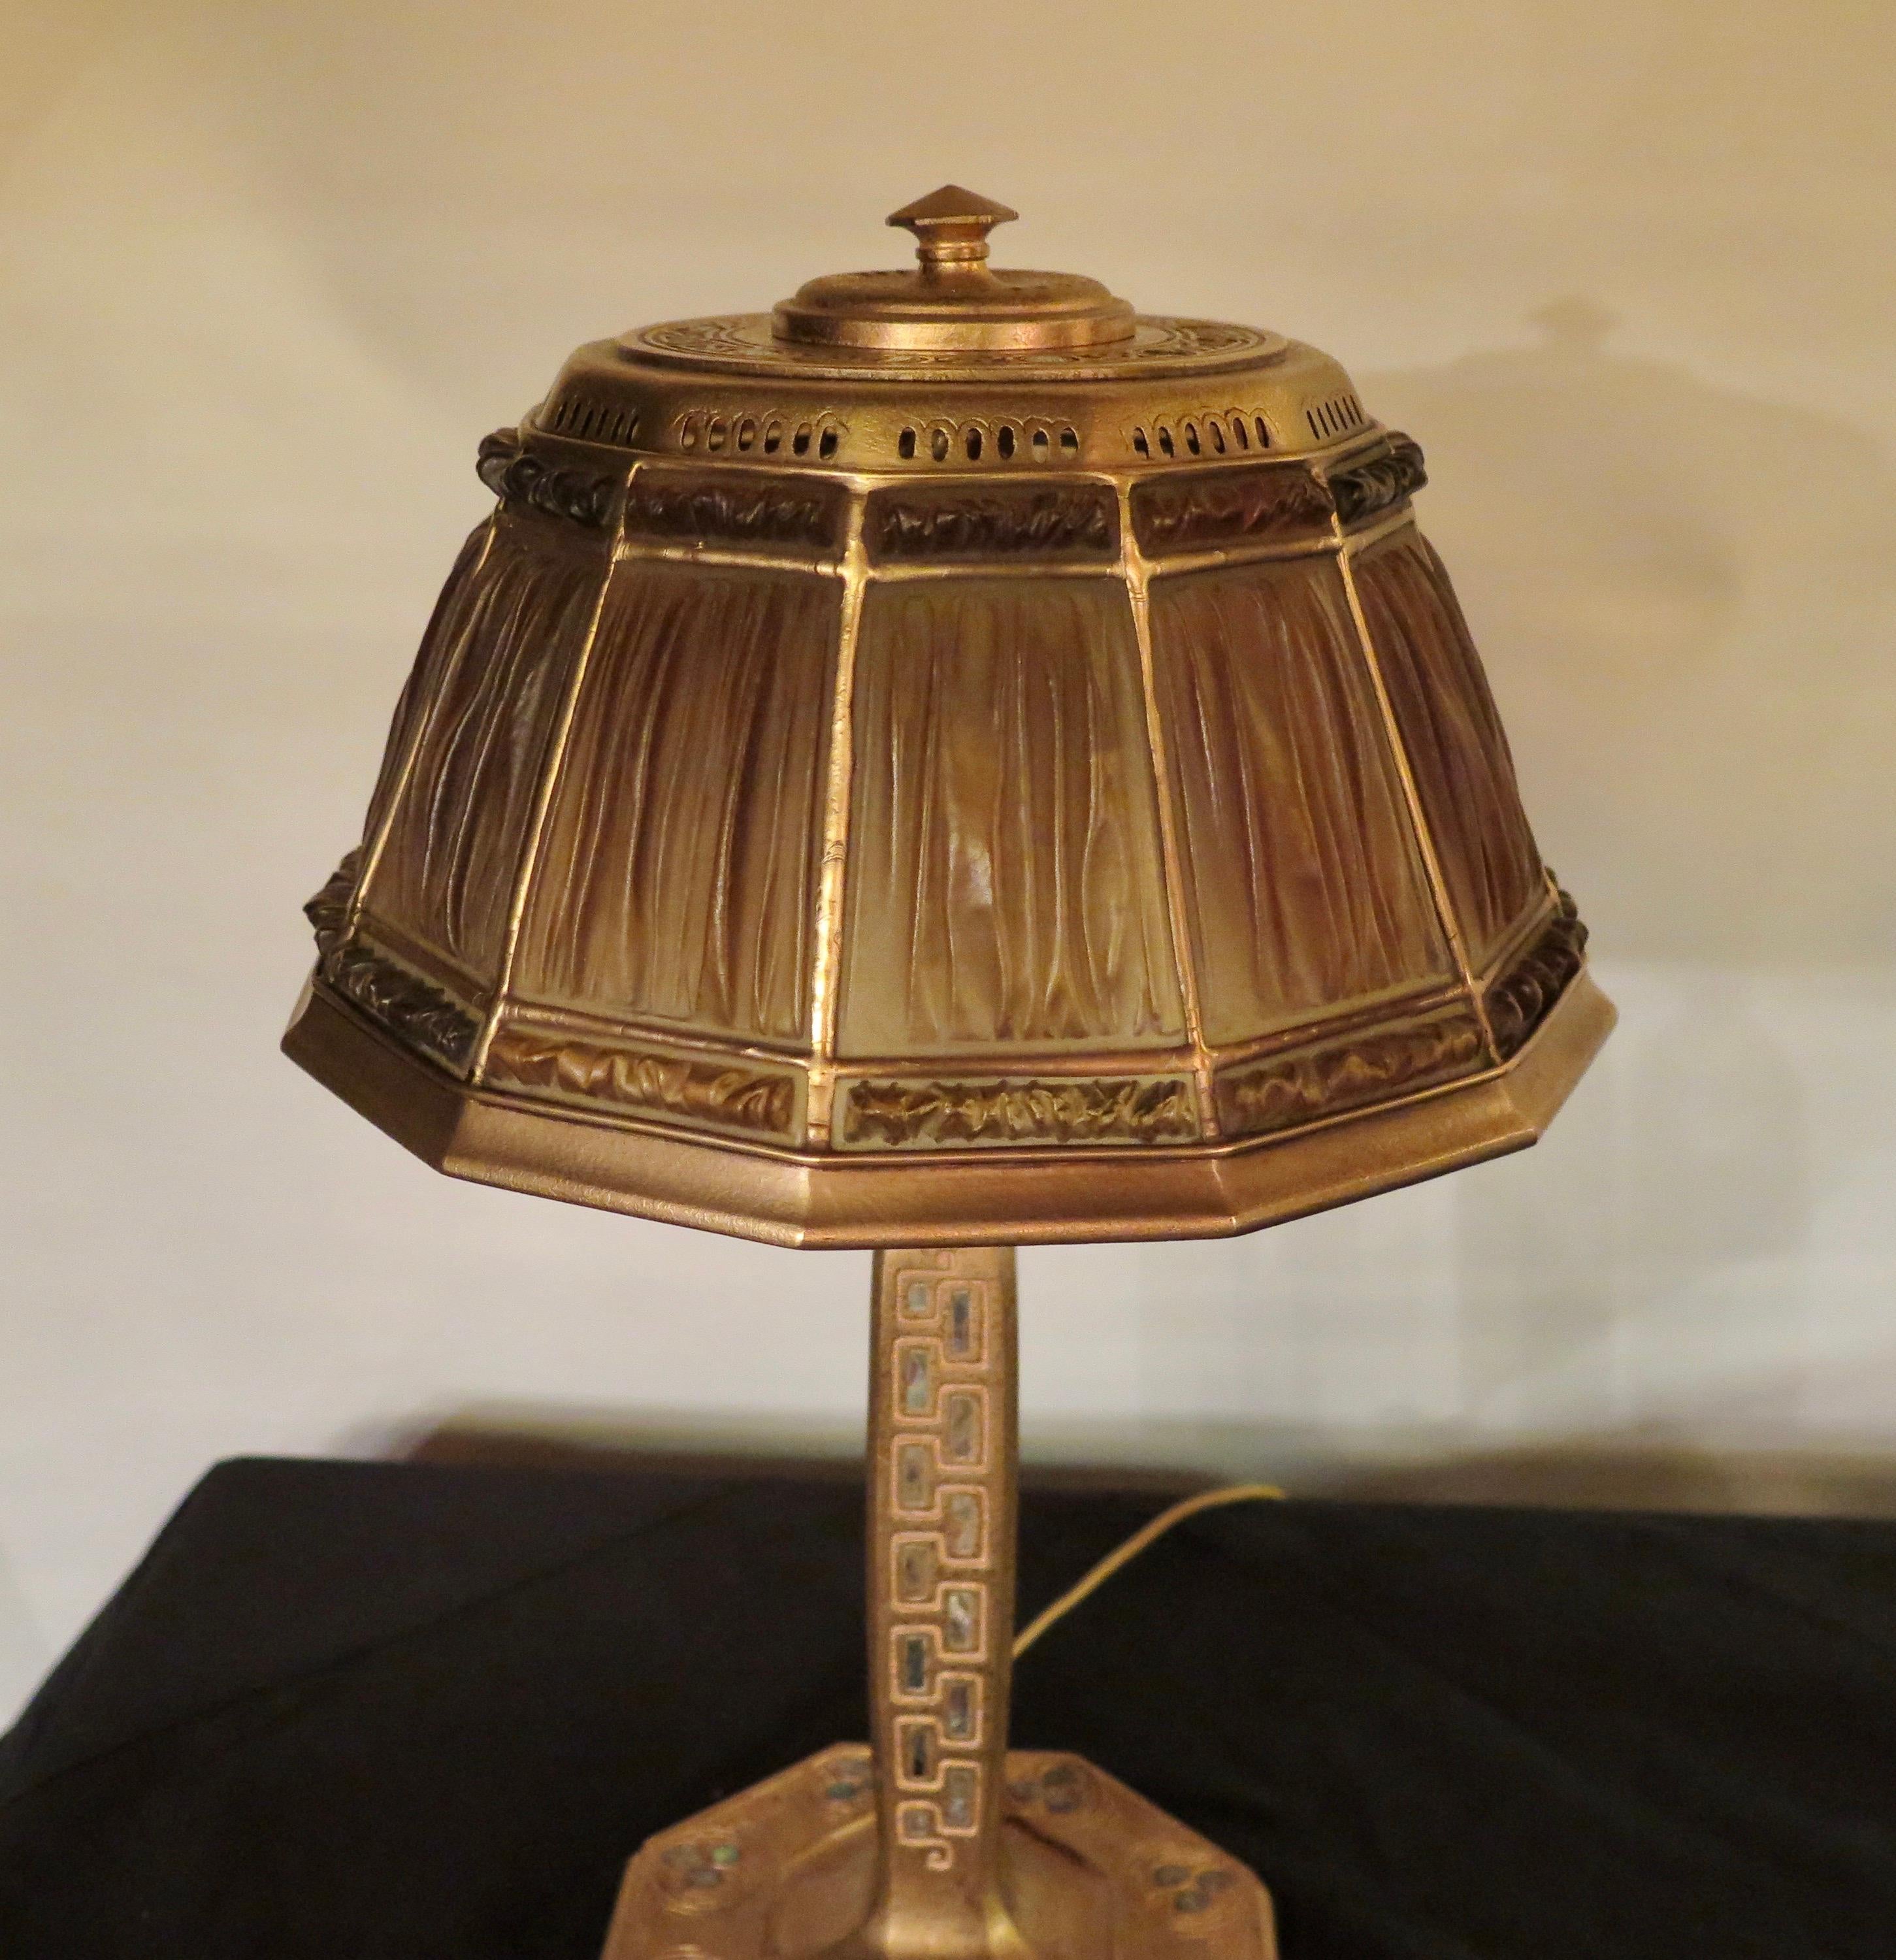 This stunning Tiffany Studios, New York desk lamp dates from the early 20th century. The desk lamp base is beautifully designed in doré bronze decorated with a motif of multiple inlaid pieces of abalone shell. An exquisite amber color linenfold